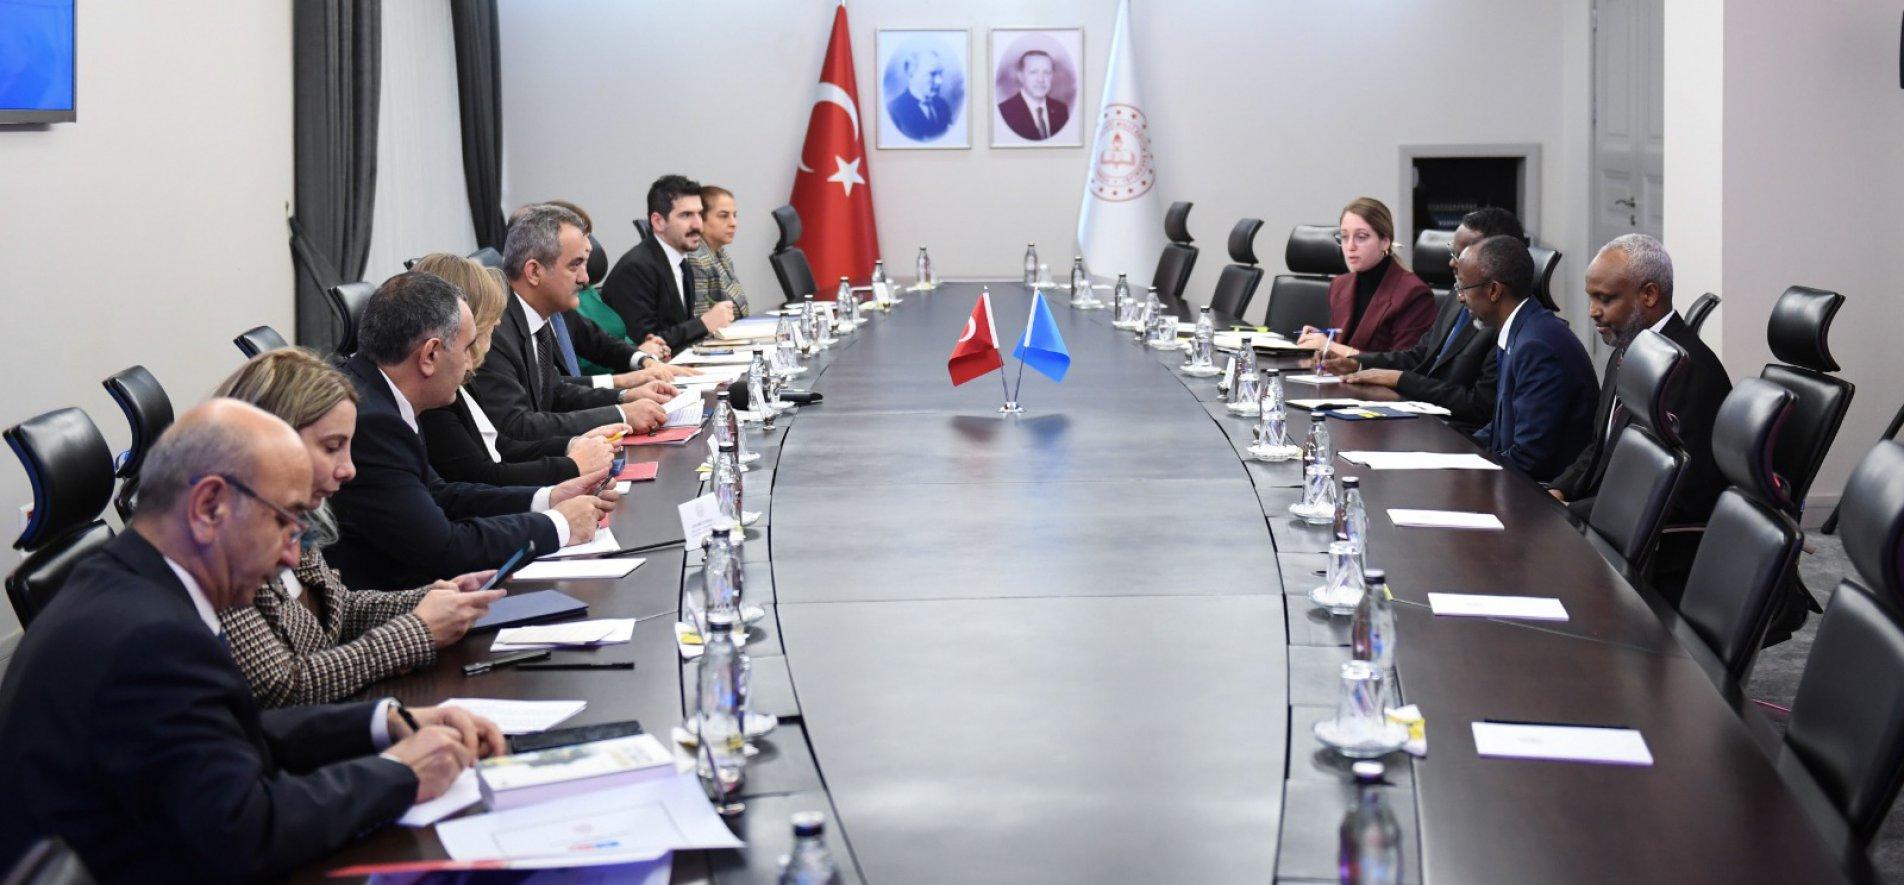 MINISTER ÖZER HAD A MEETING WITH HIS SOMALIAN COUNTERPART MOHAMED